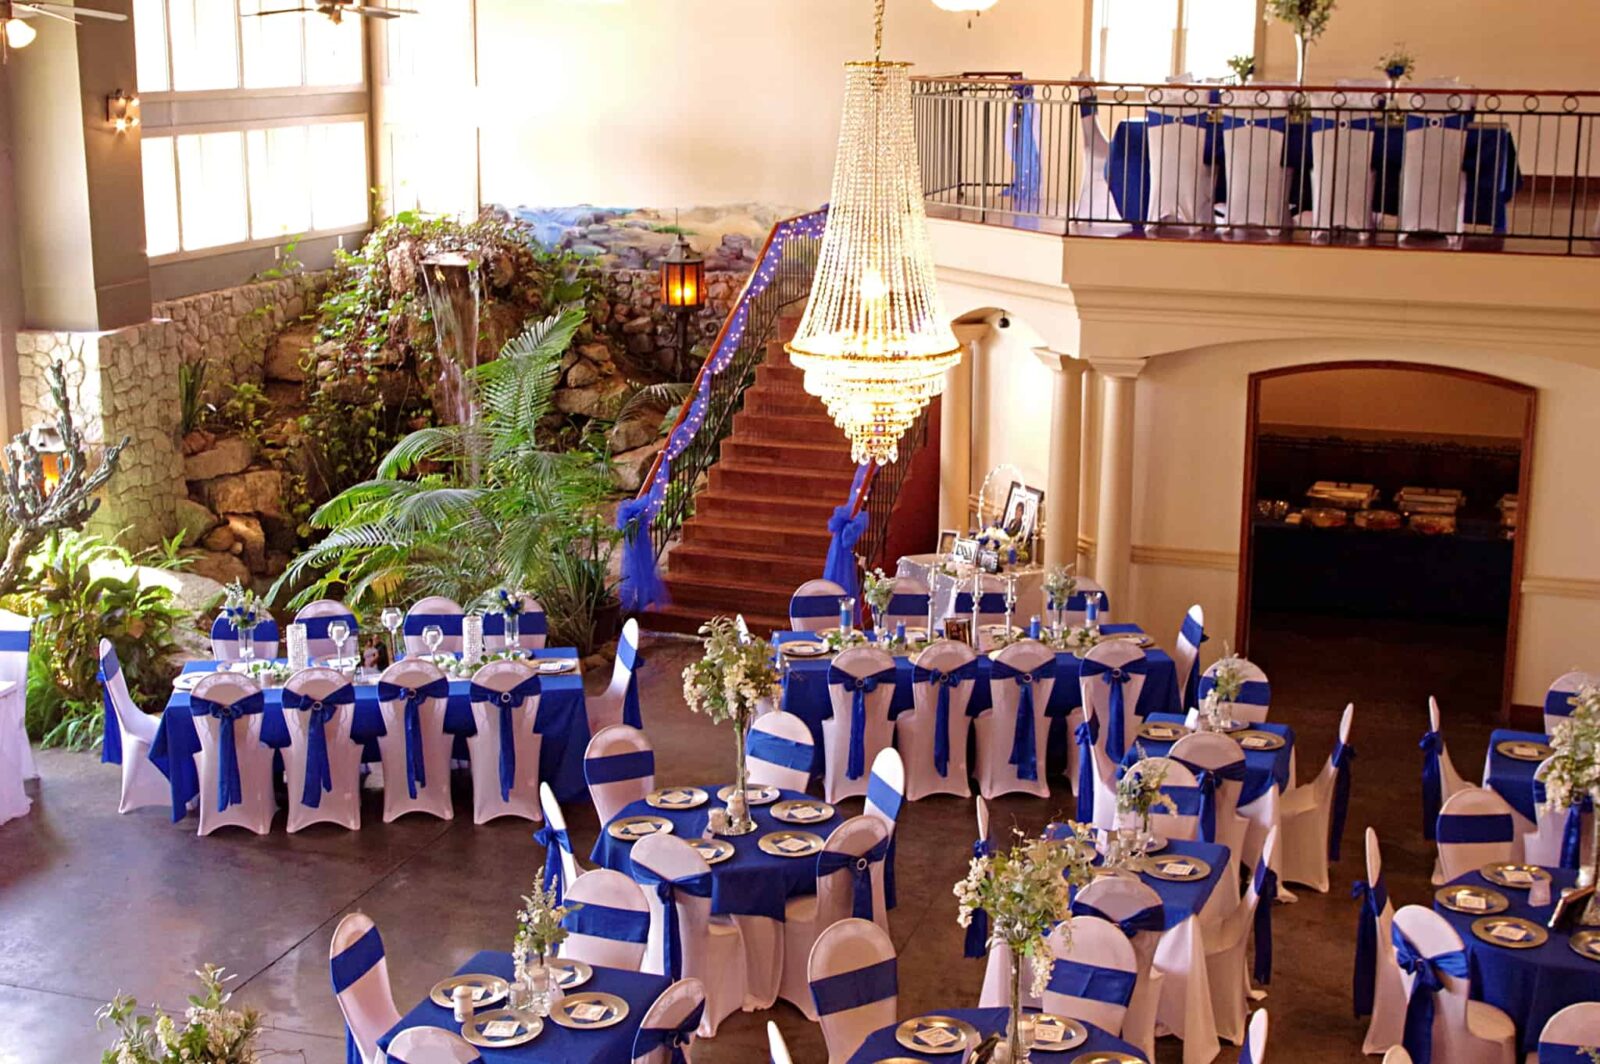 A room filled with tables and chairs covered in blue and white linens.